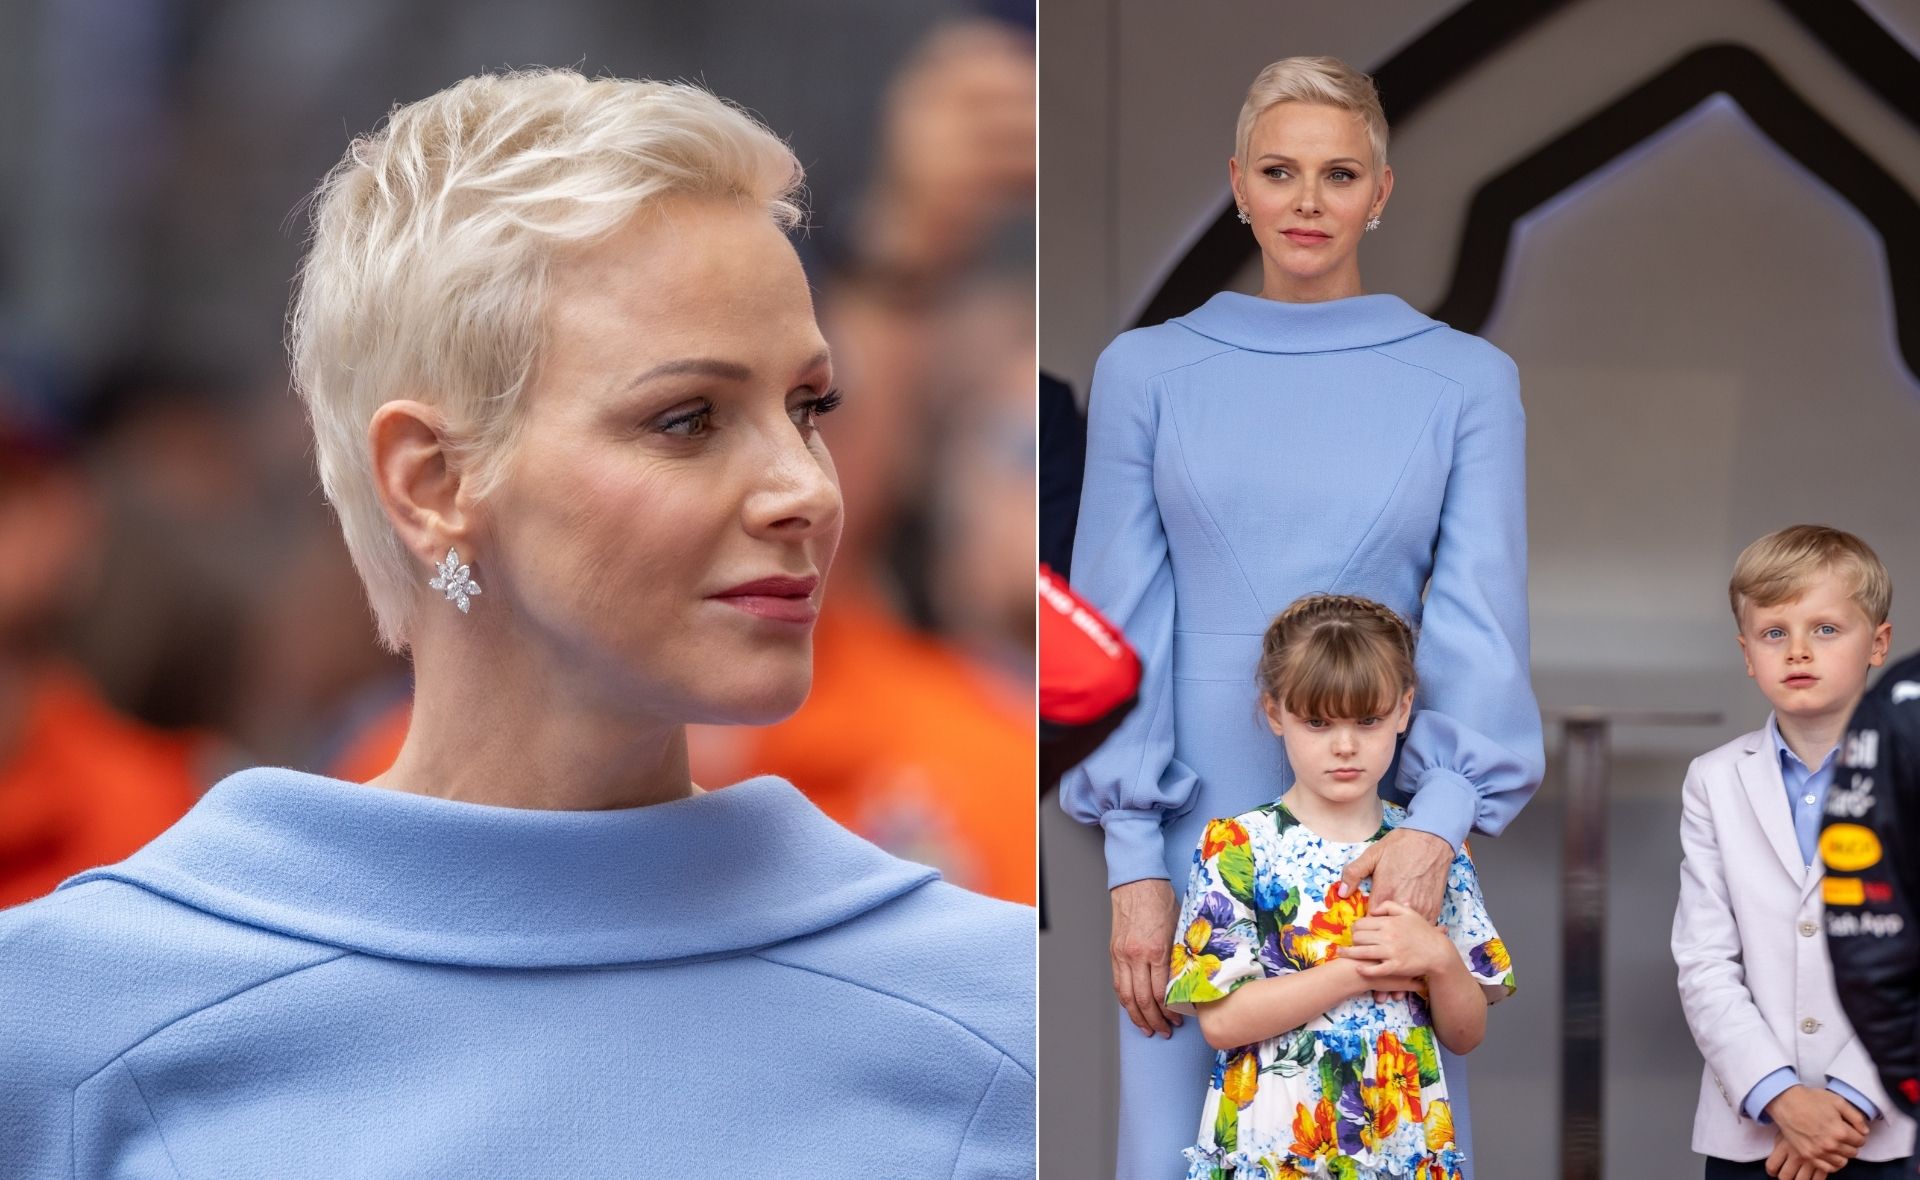 Princess Charlene of Monaco shares rare candid pictures of her twins before stepping out for a special event